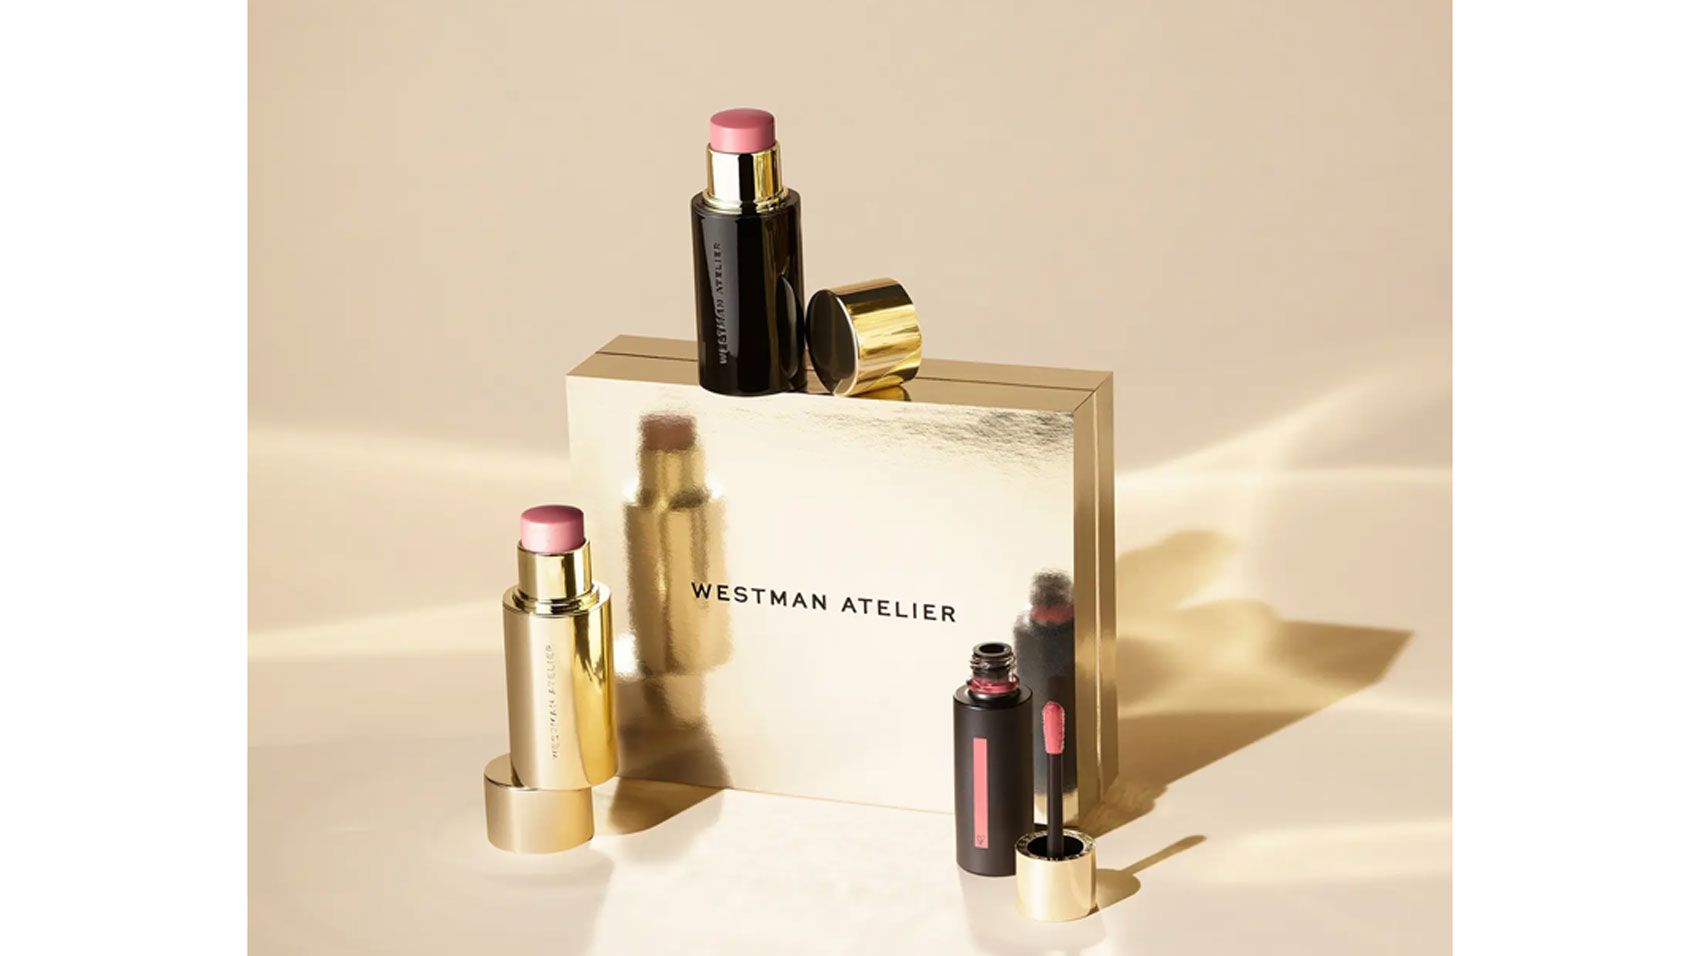 Review, Westman Atelier Le Box Holiday Edition 2020